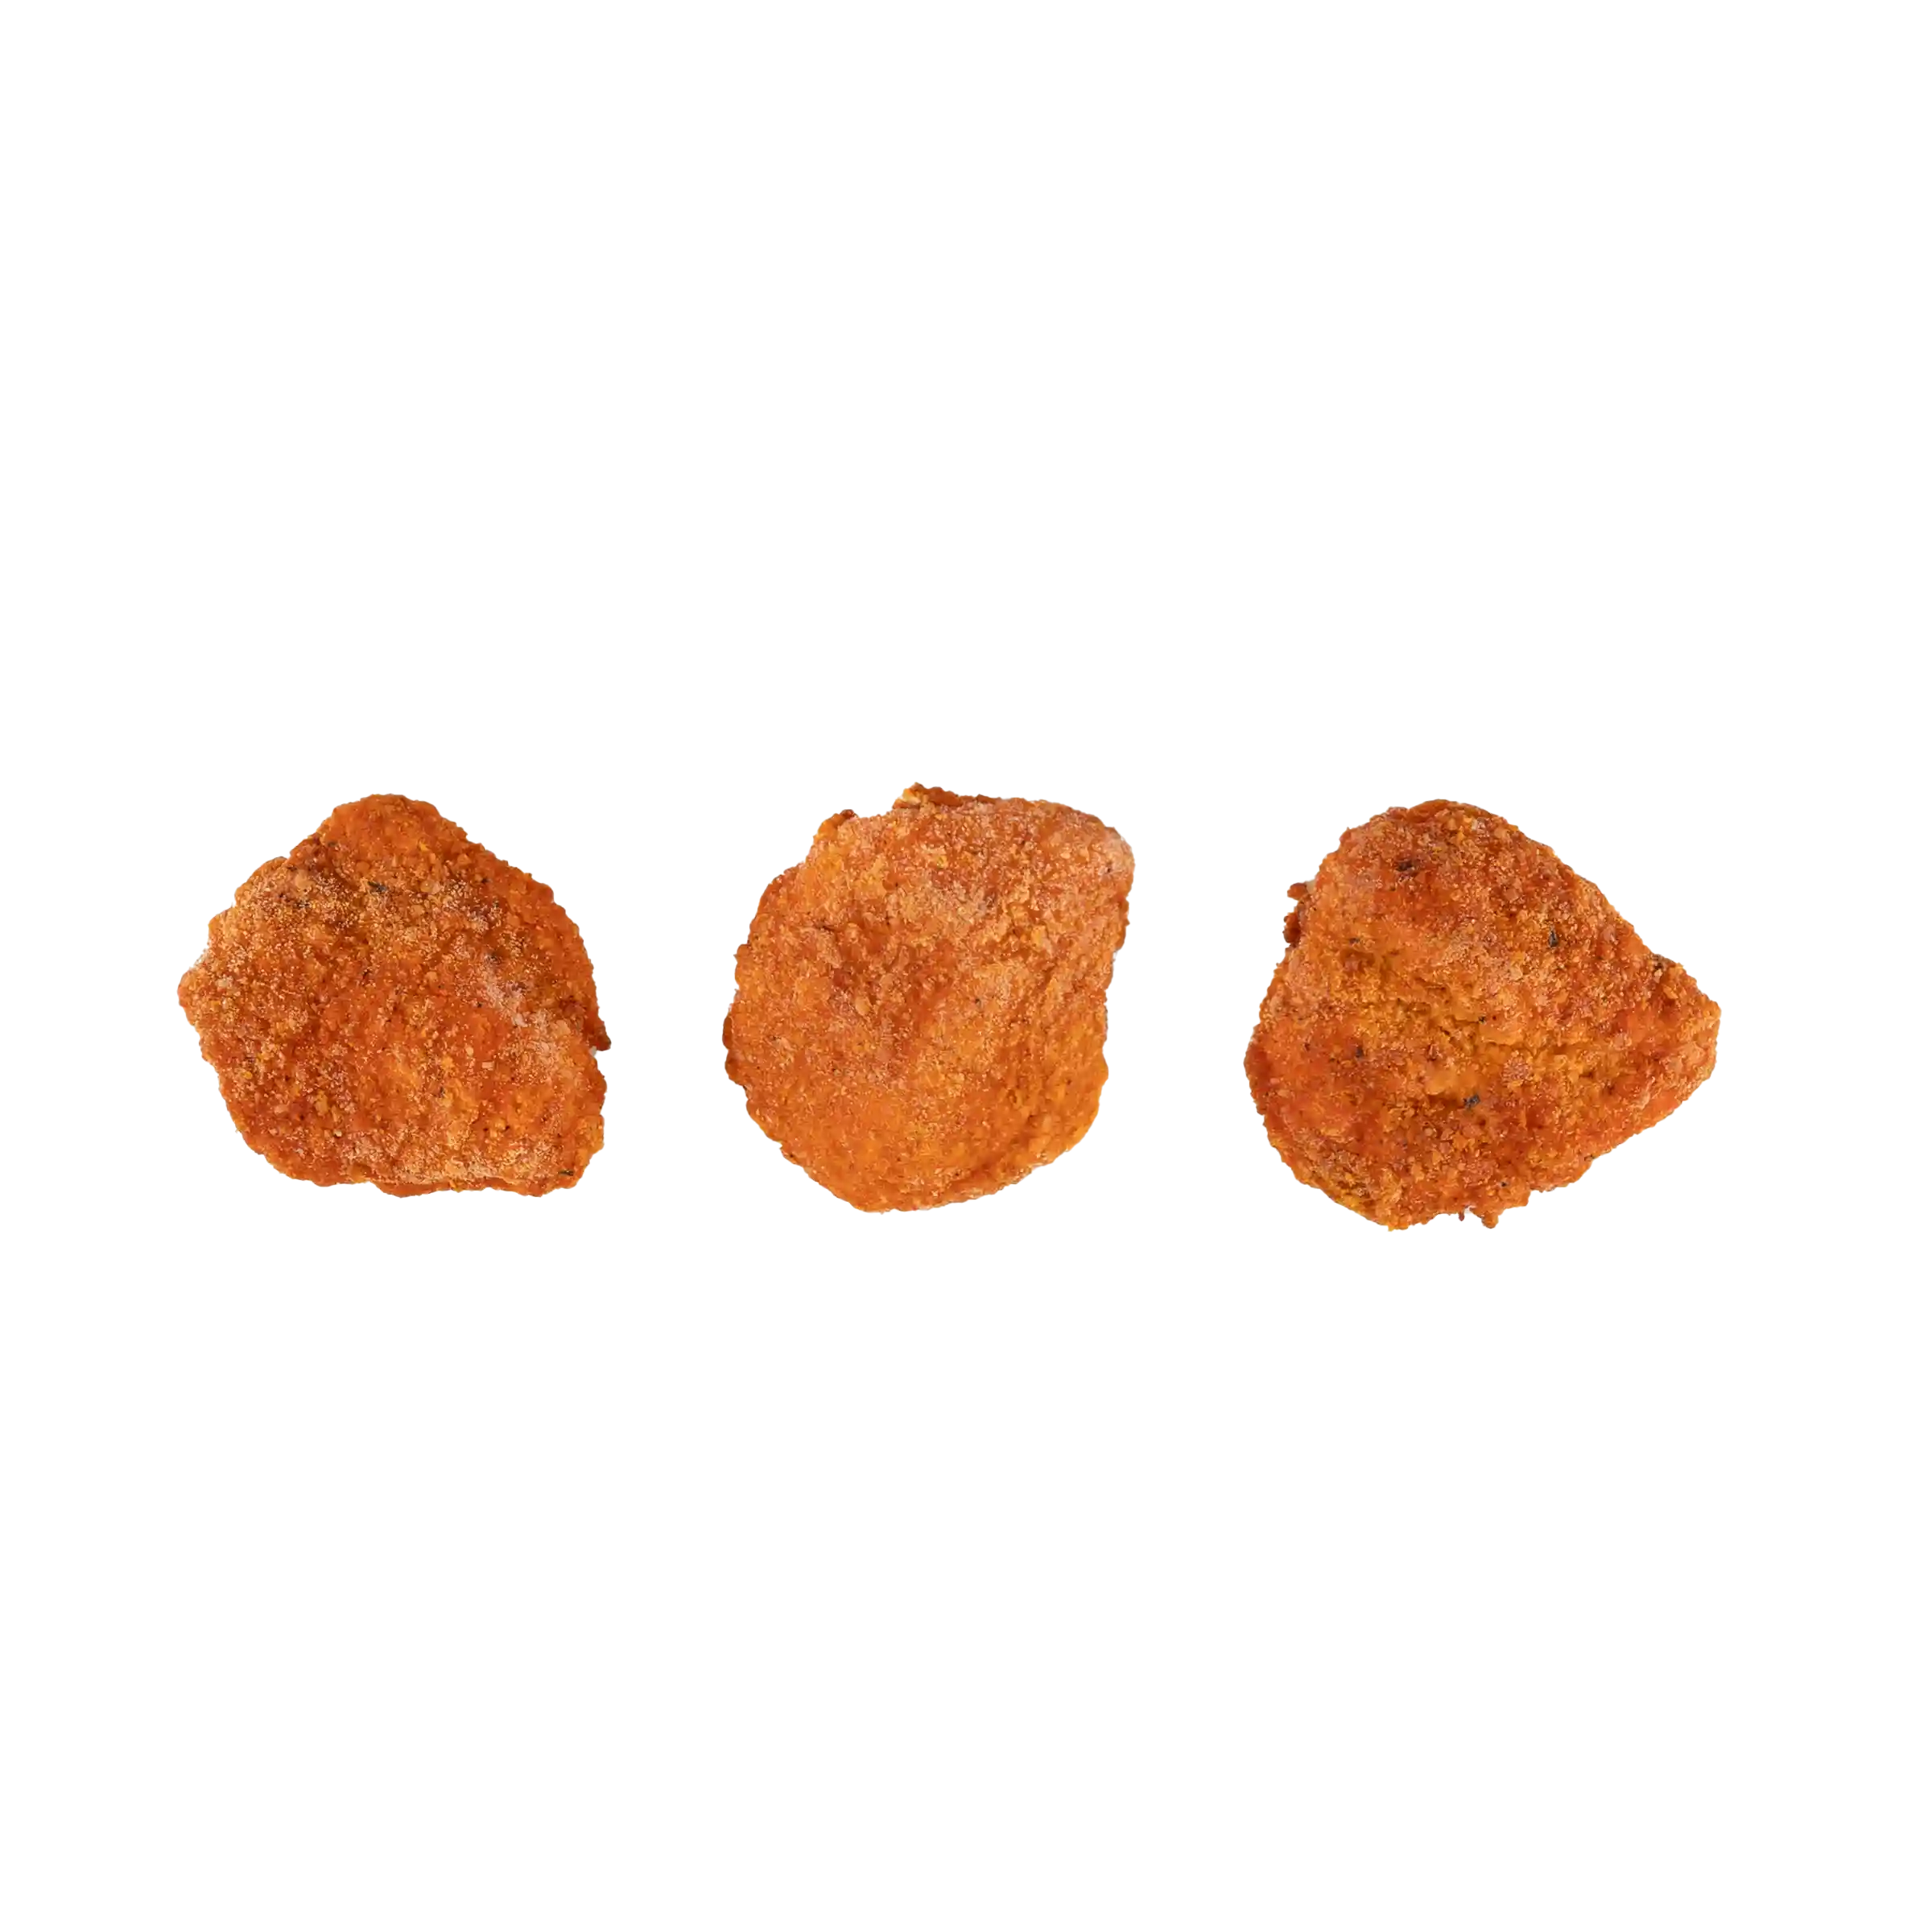 Tyson® Fully Cooked, Whole Grain Breaded Hot 'N Spicy Whole Muscle Chicken Breast Filets, 4.0 oz._image_11